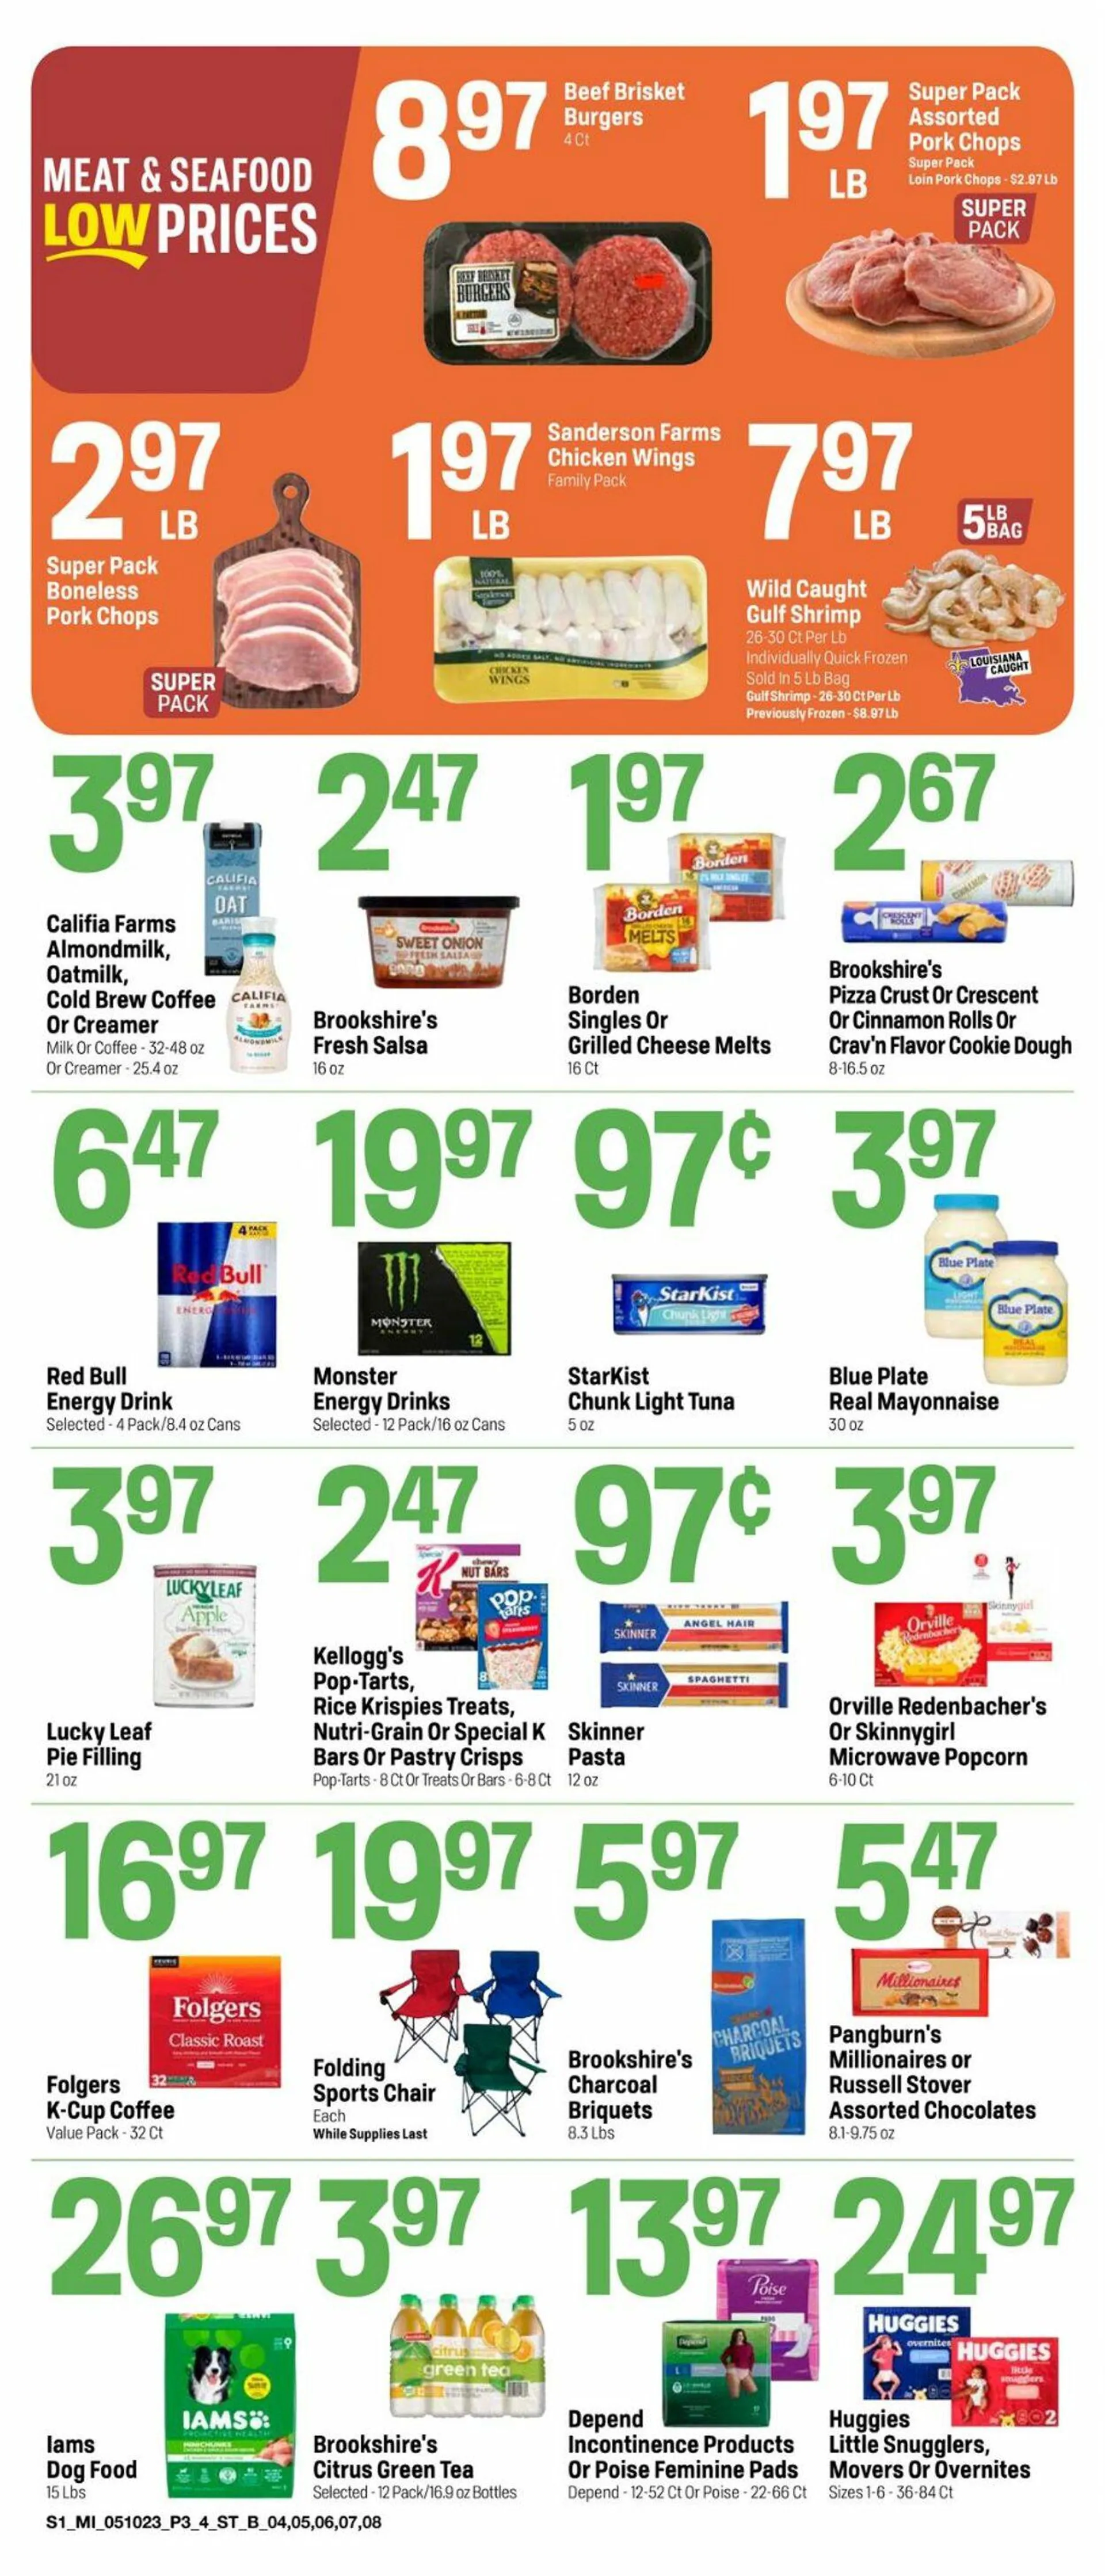 Super 1 Foods Current weekly ad - 3